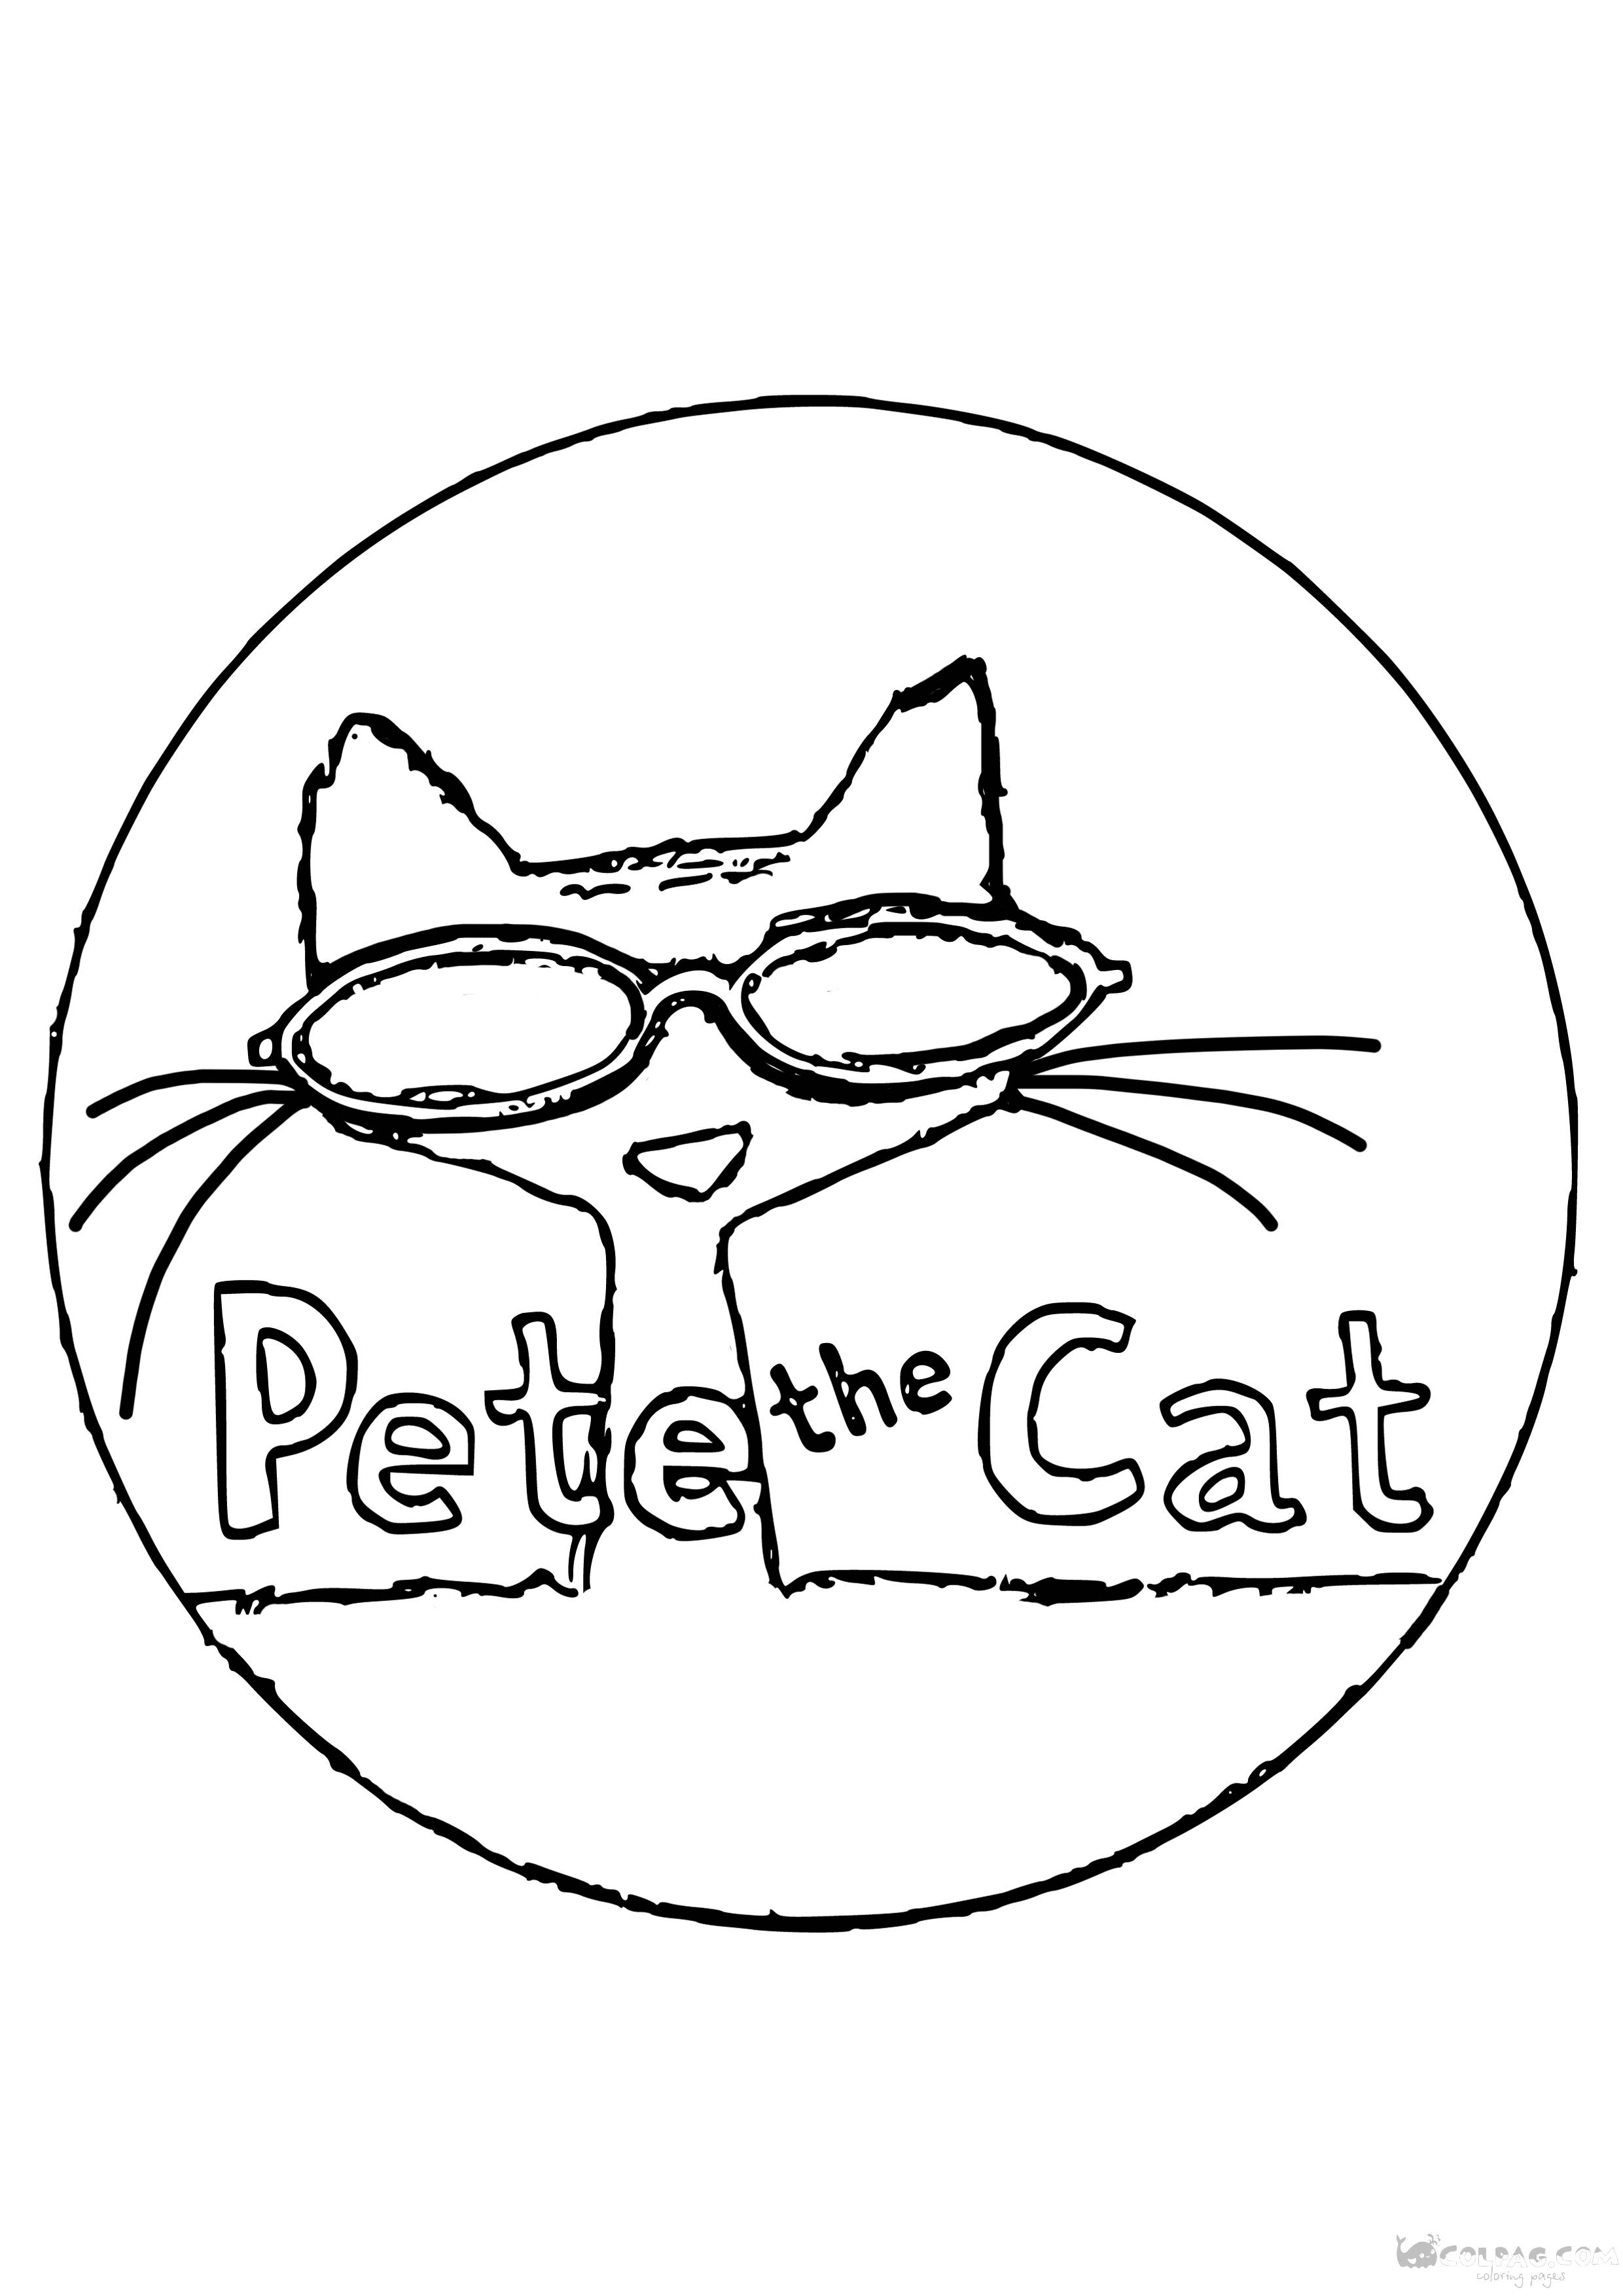 pete-the-cat-coloting-page-10-colpag